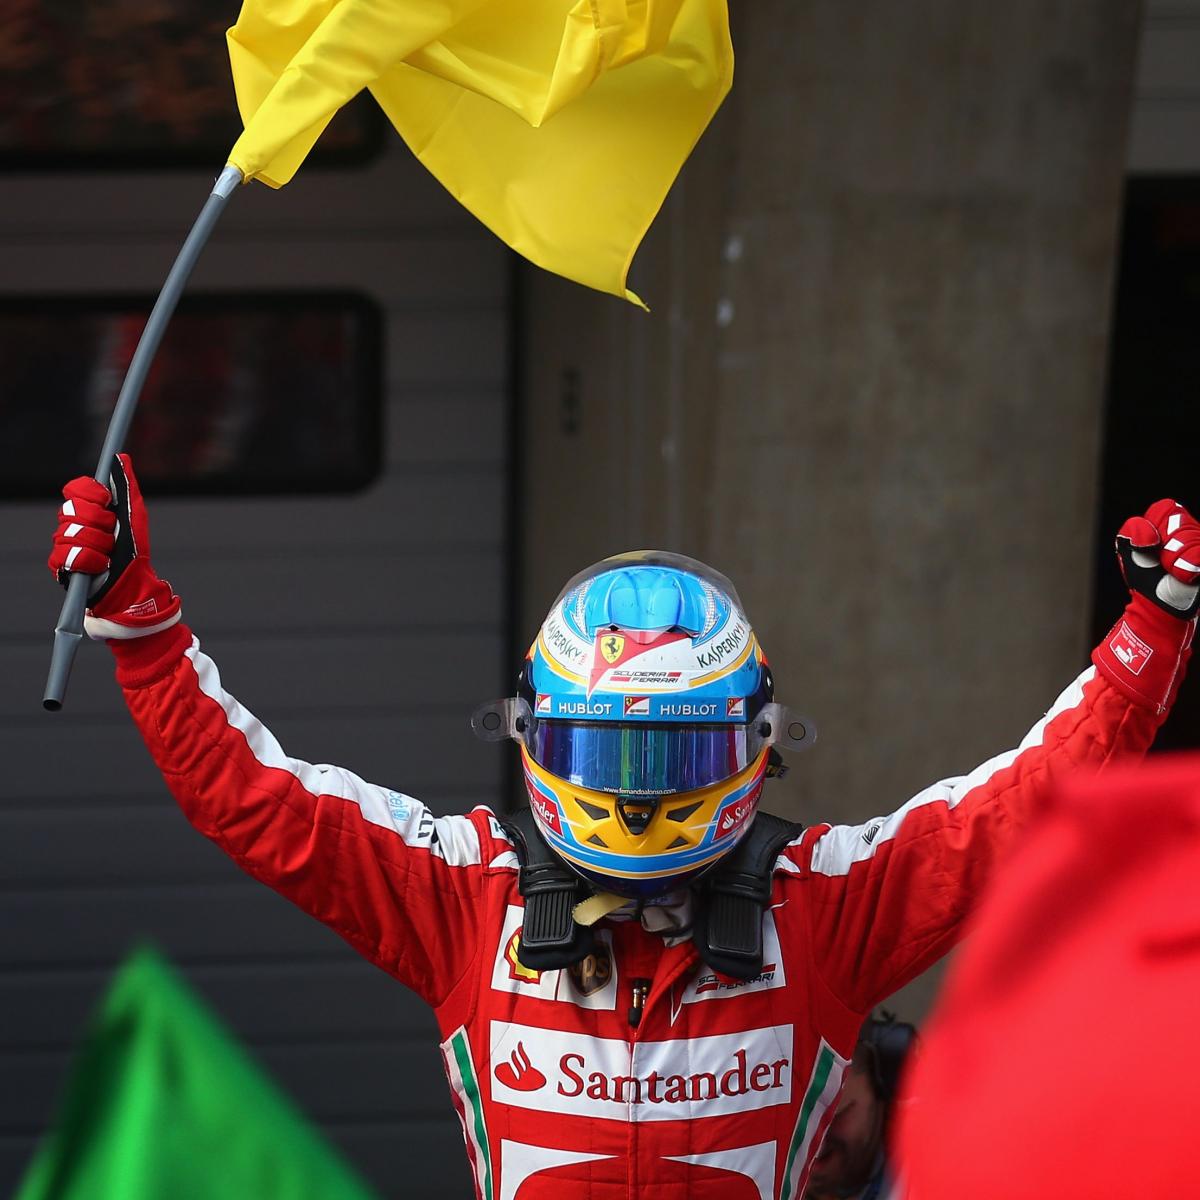 Chinese Grand Prix 2013 Results: Reaction, Leaders and Post-Race Analysis